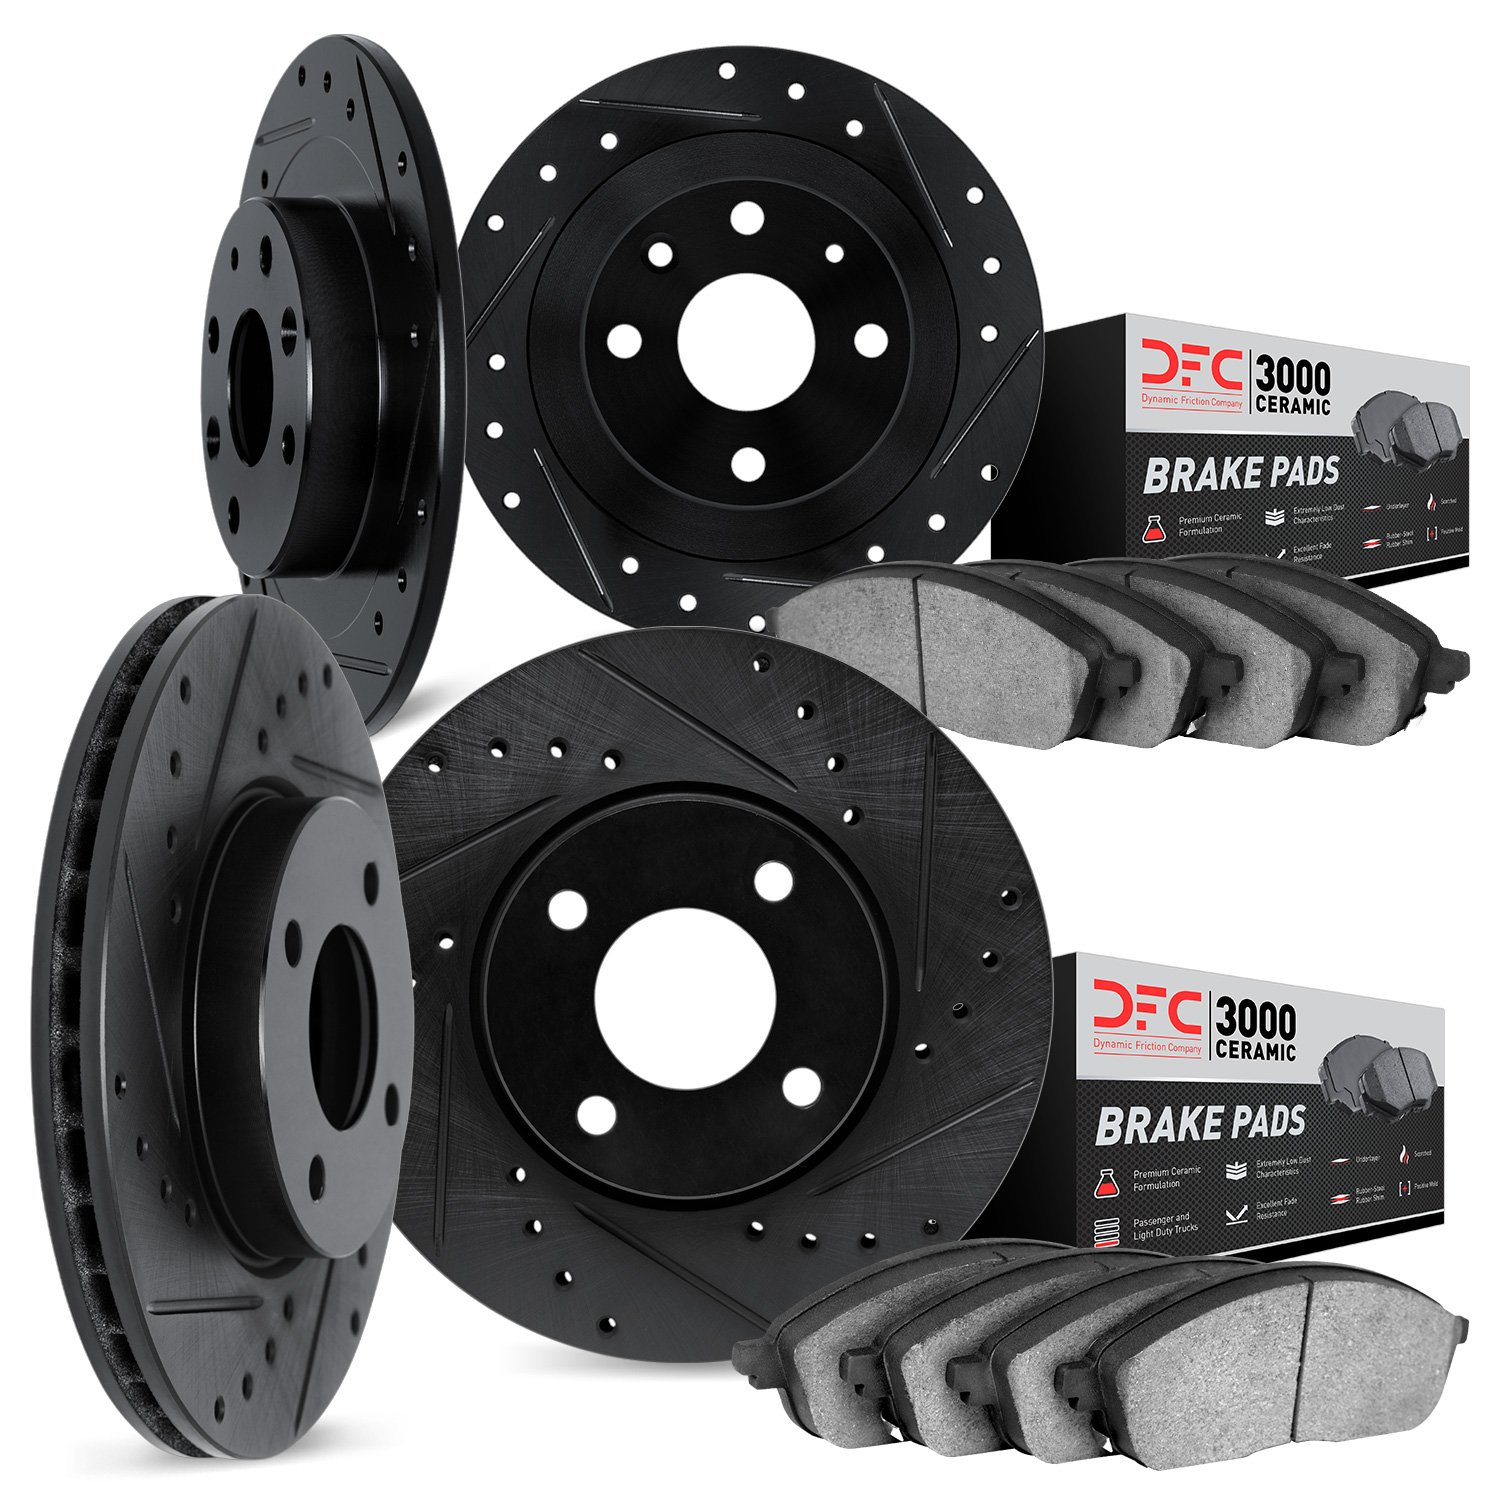 8304-58008 Drilled/Slotted Brake Rotors with 3000-Series Ceramic Brake Pads Kit [Black], 1998-1999 Acura/Honda, Position: Front